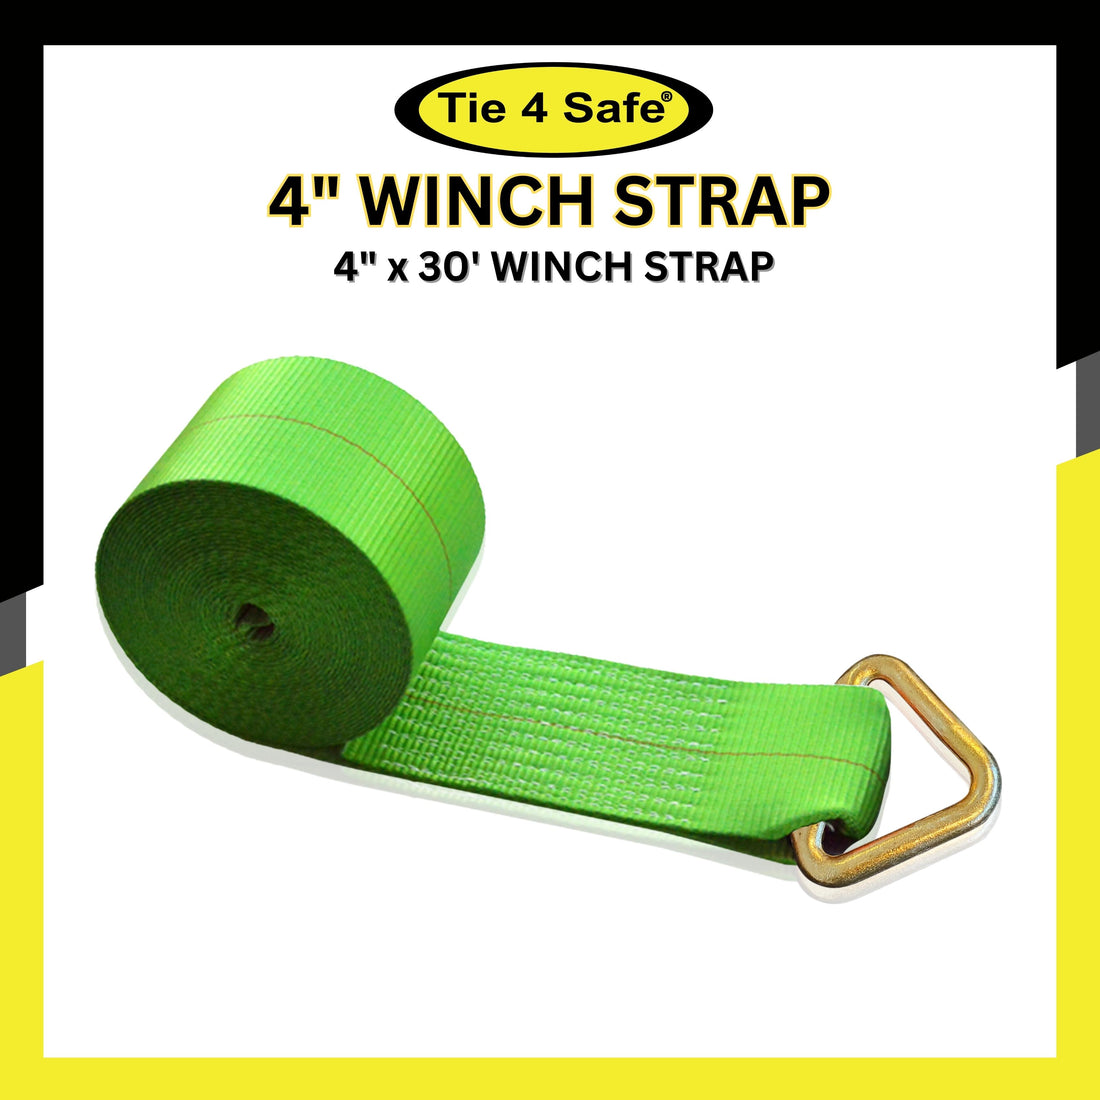 4" x 30' Winch Strap With Delta Ring